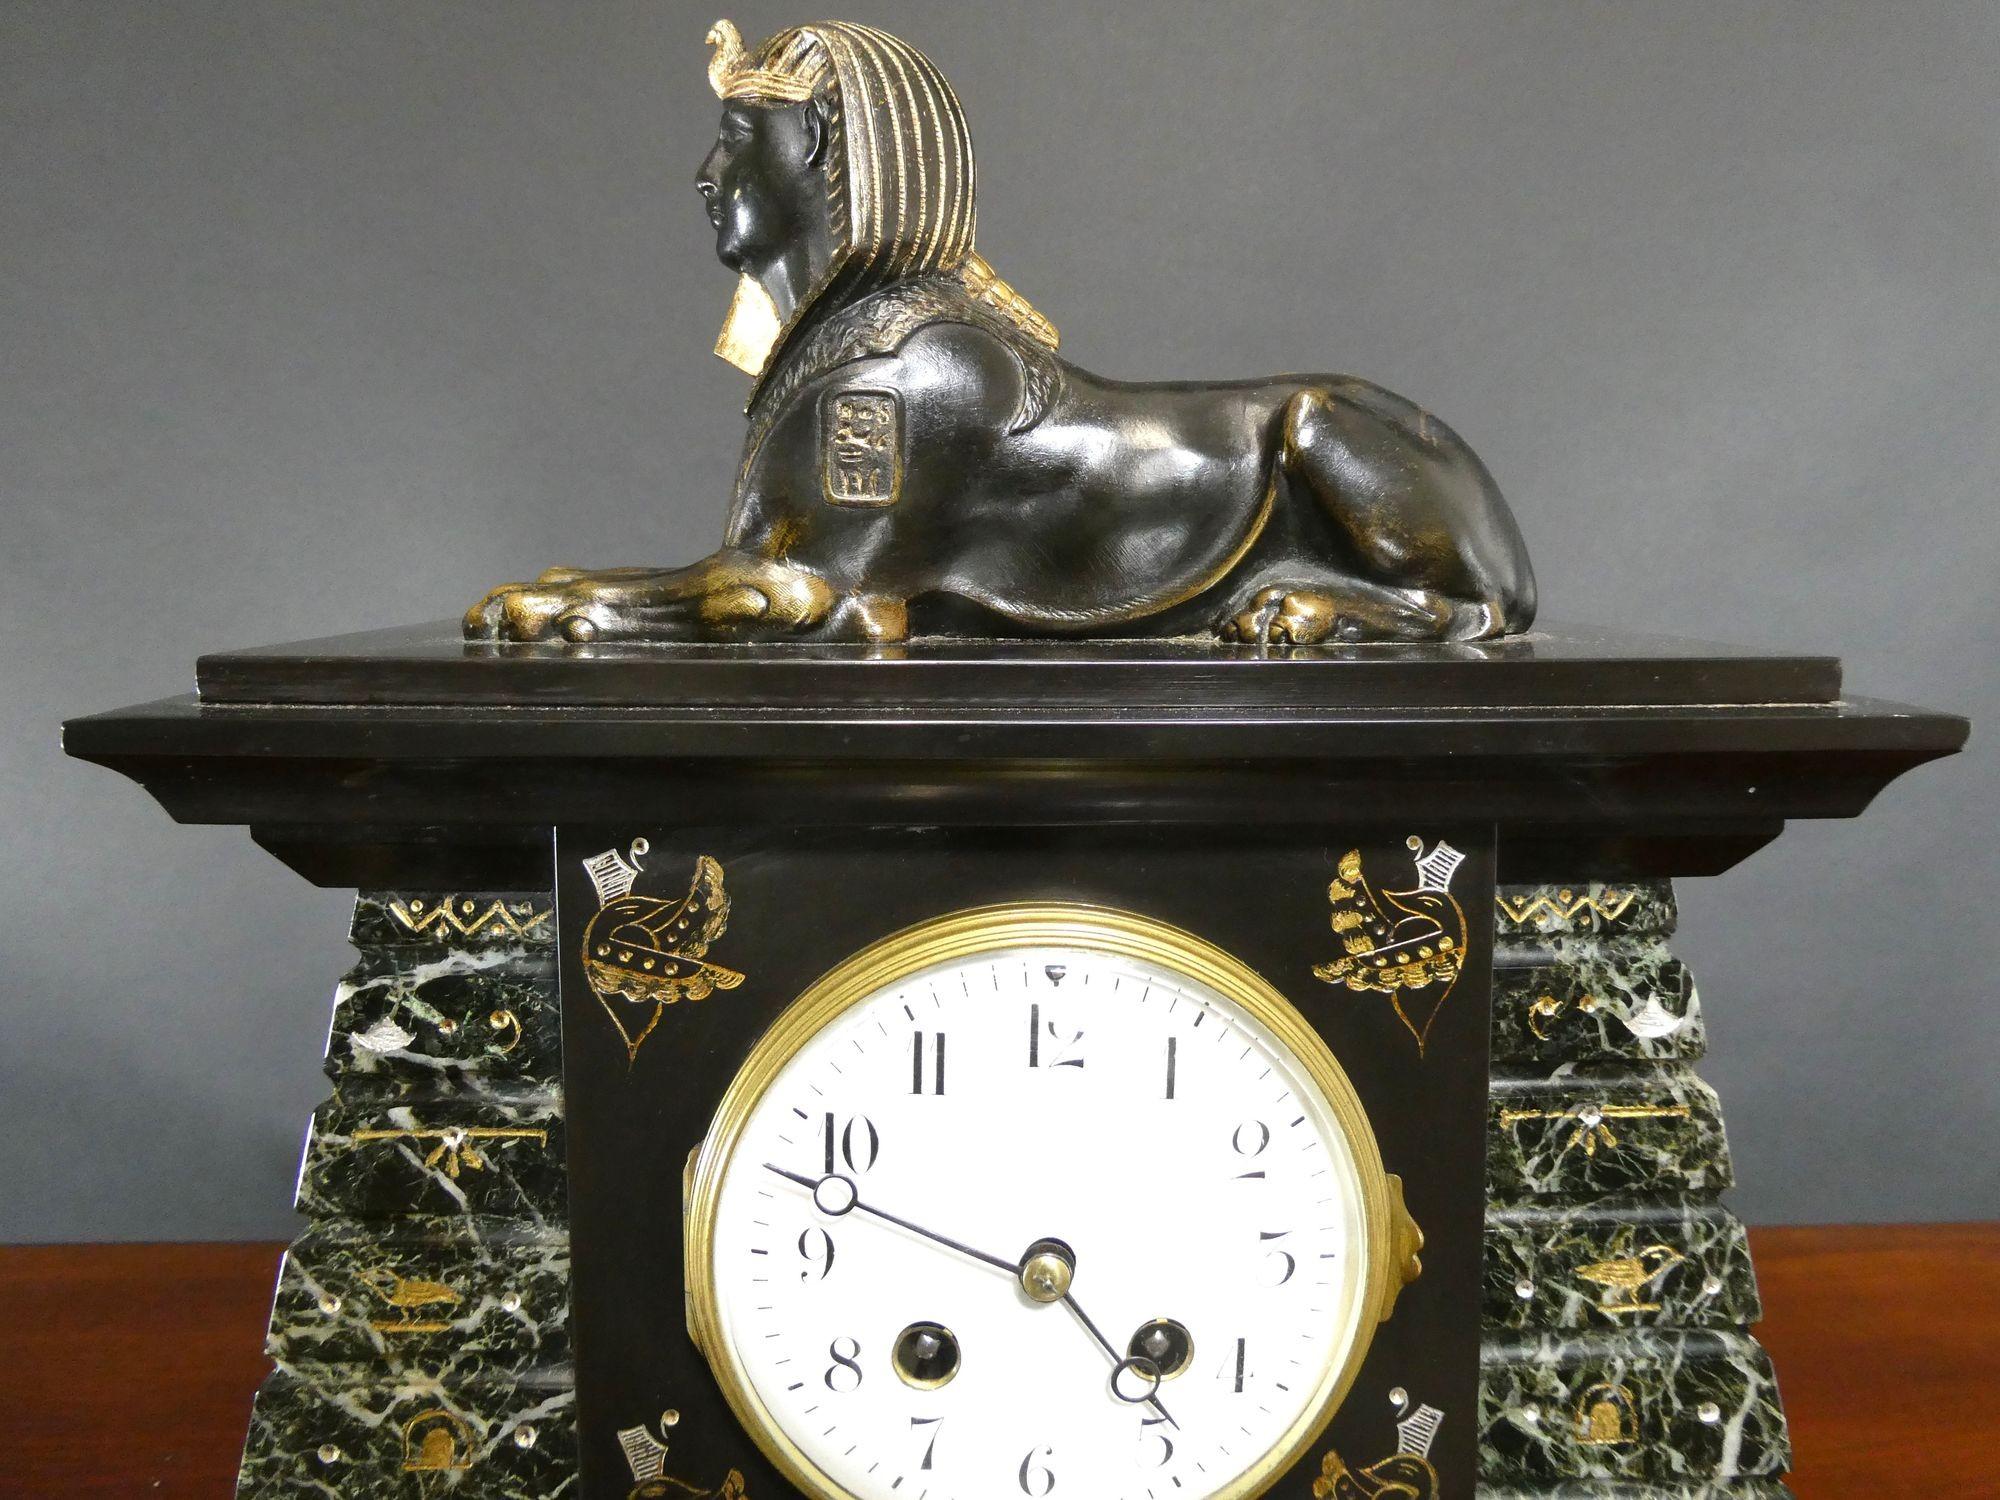 Egyptian Revival Bronze and Marble Mantel Clock

Egyptian revival mantel clock housed in a polishes black slate and marble stepped case, decorated with winged uraeus and hieroglyphs, surmounted by a patinated bronze sphinx wearing nemes and resting